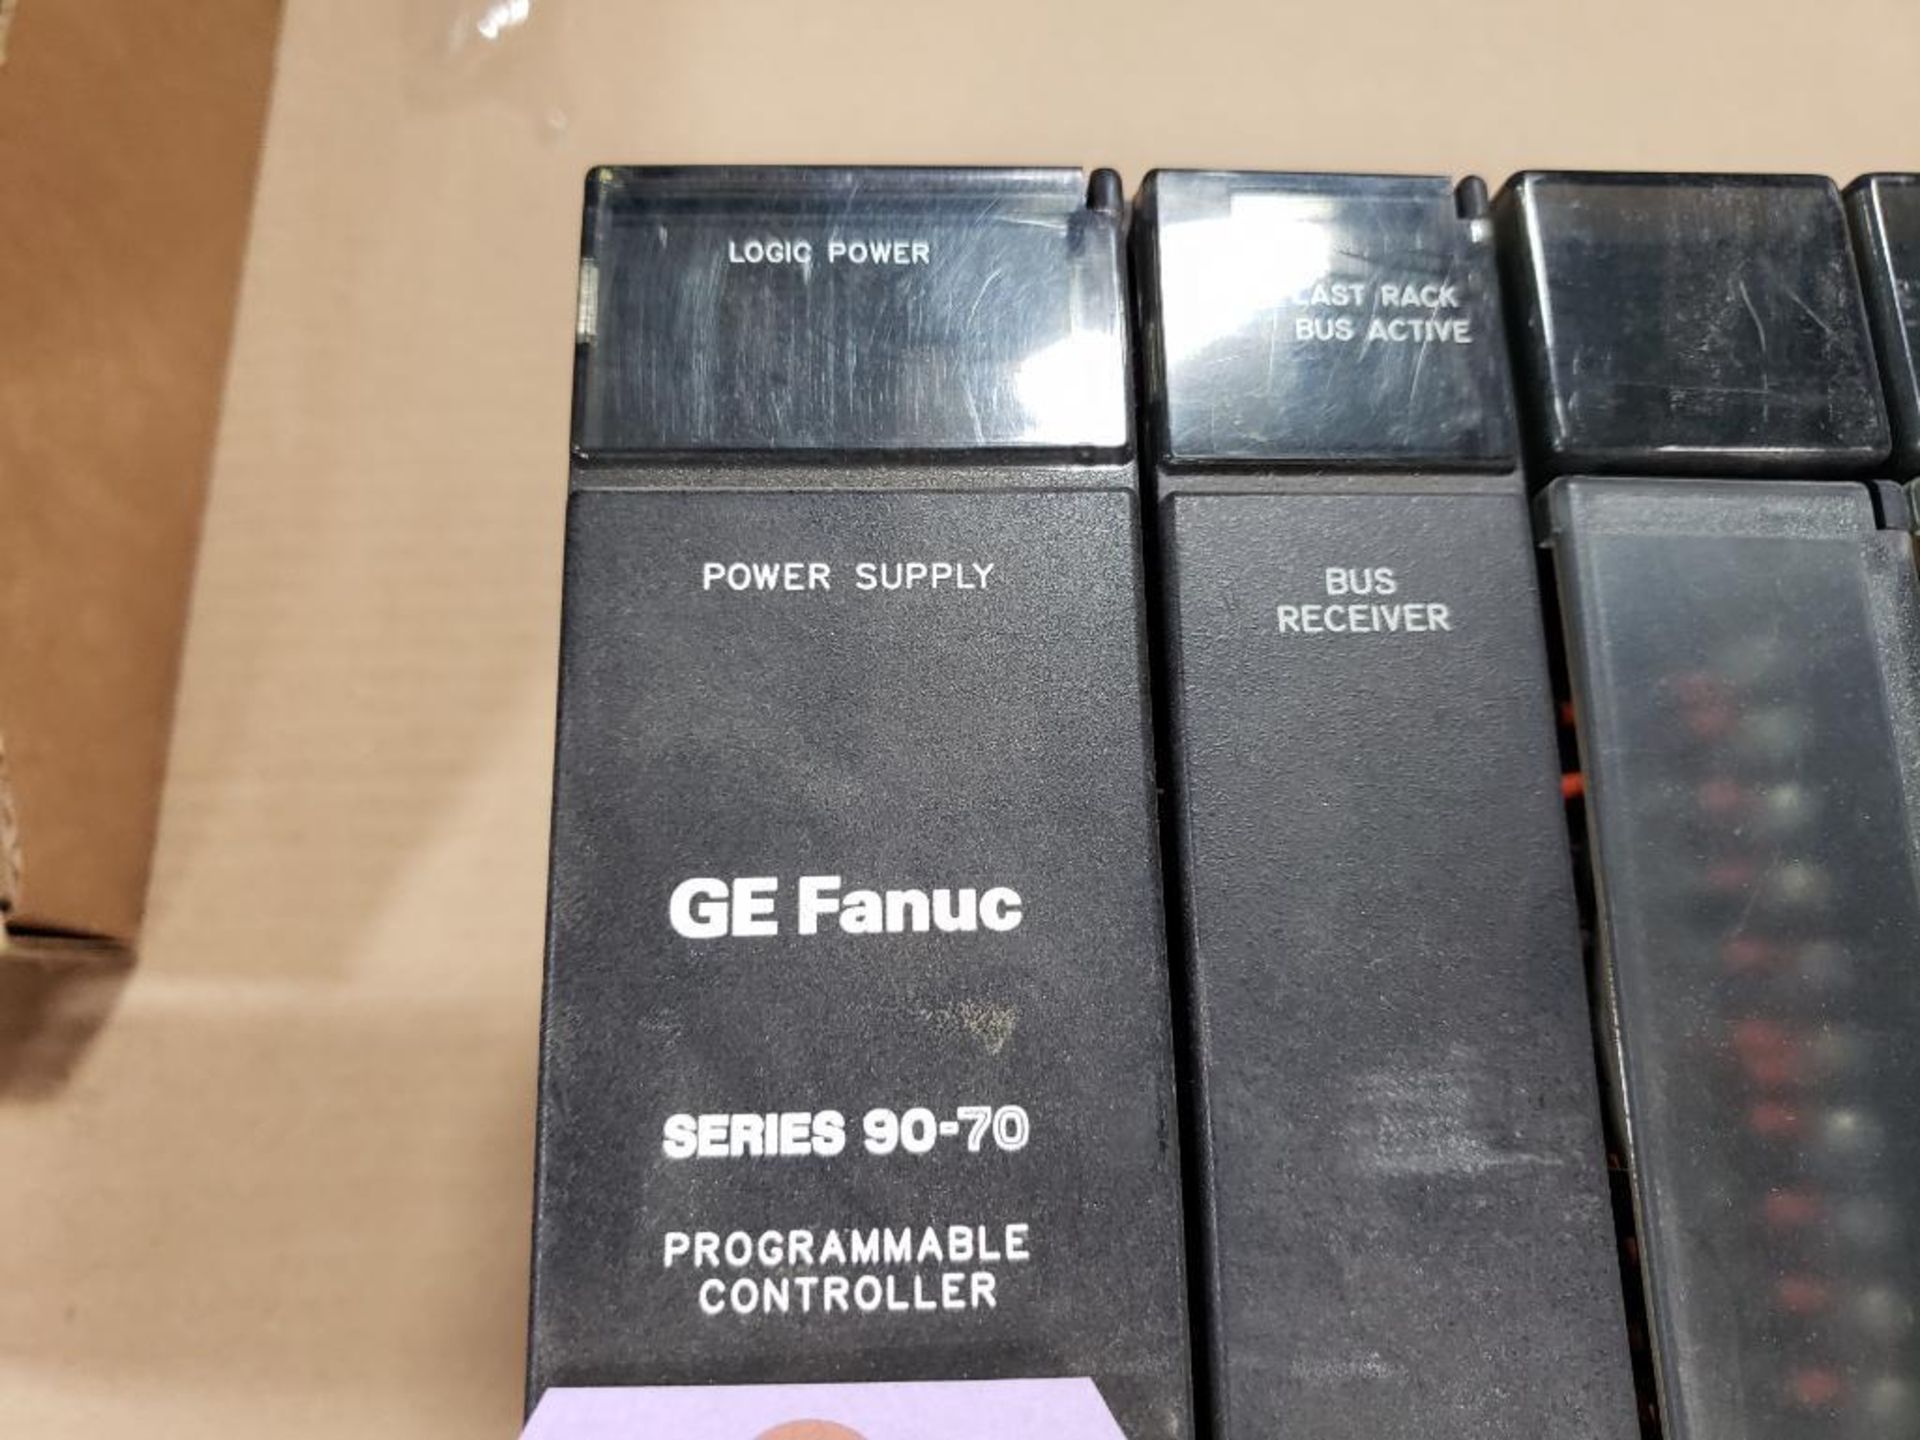 GE Fanuc Series 90-70 programmable controller rack. - Image 2 of 9